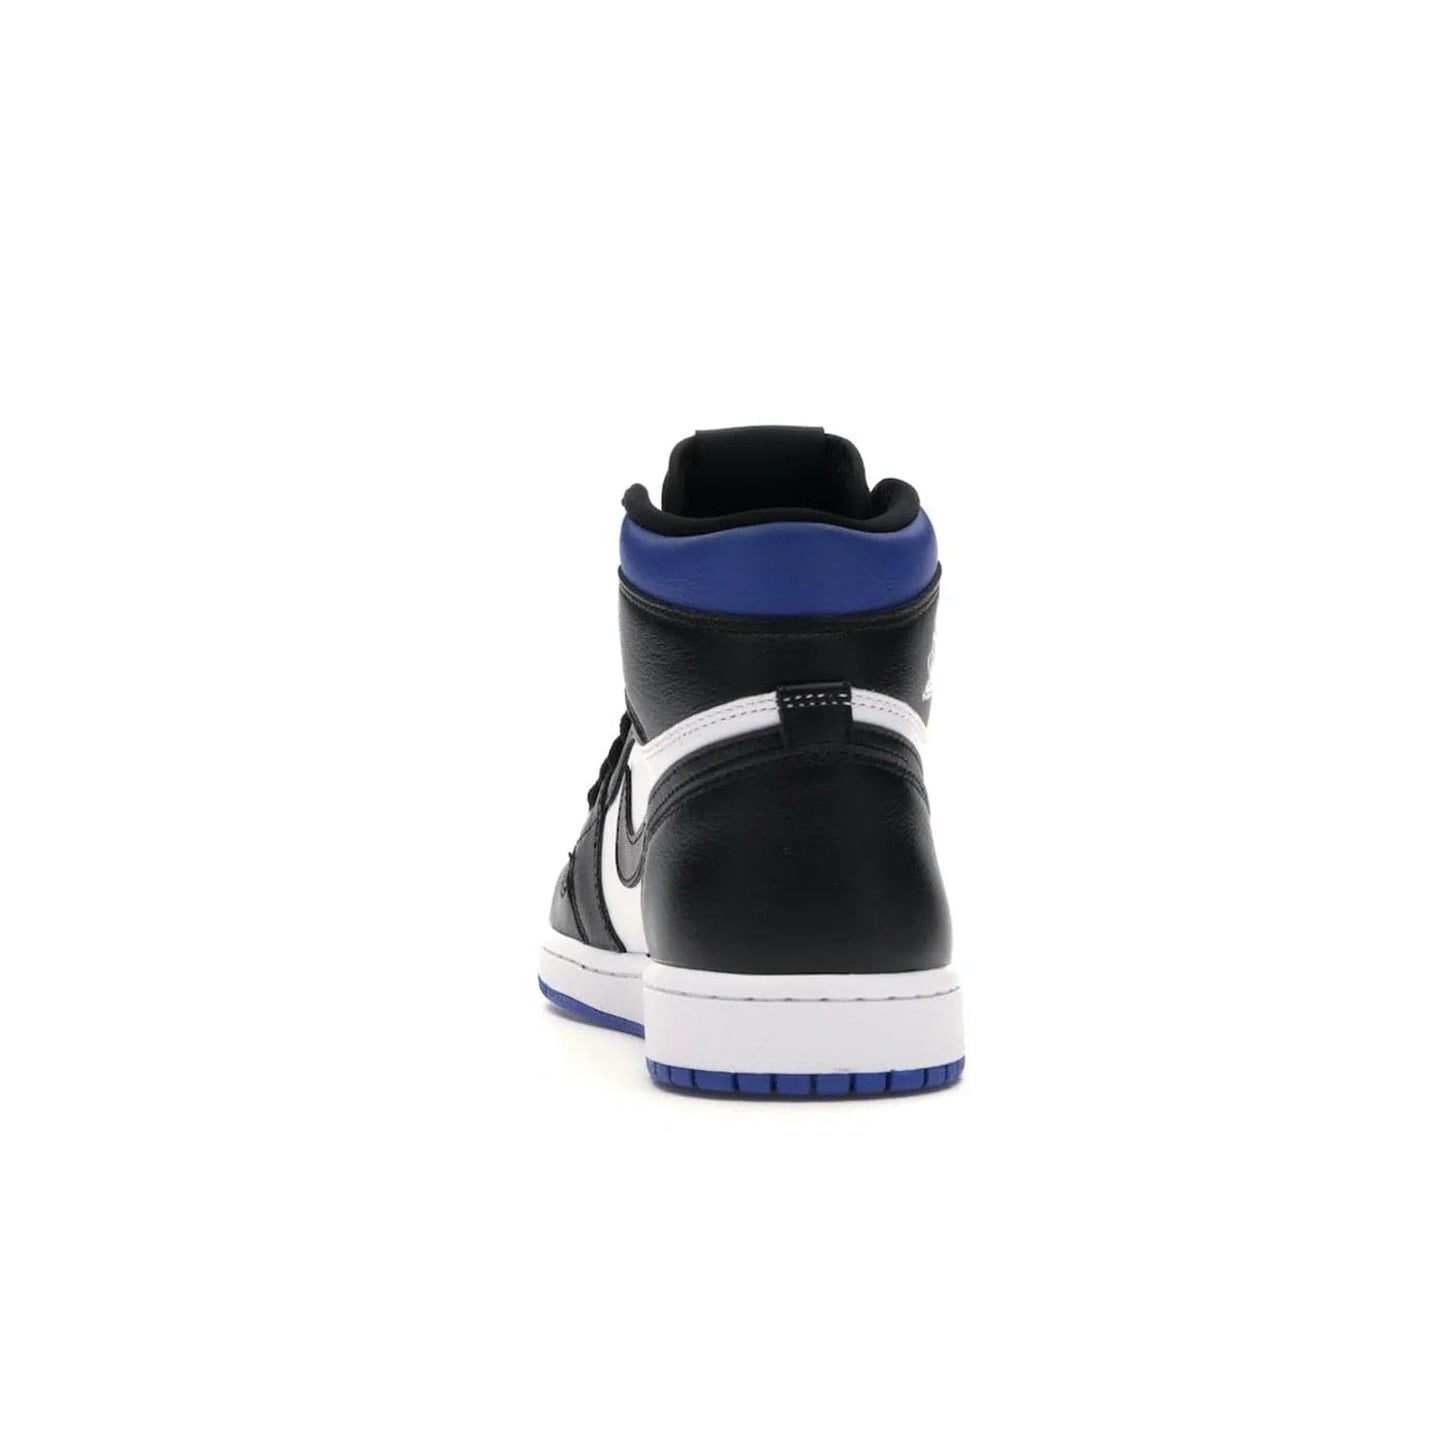 Jordan 1 Retro High Royal Toe - Image 27 - Only at www.BallersClubKickz.com - Refresh your look with the Jordan 1 Retro High Royal Toe. This classic AJ 1 sports a white and royal leather upper, black leather overlays, and branded leather tongue tag. Pick up today and set the streets ablaze.